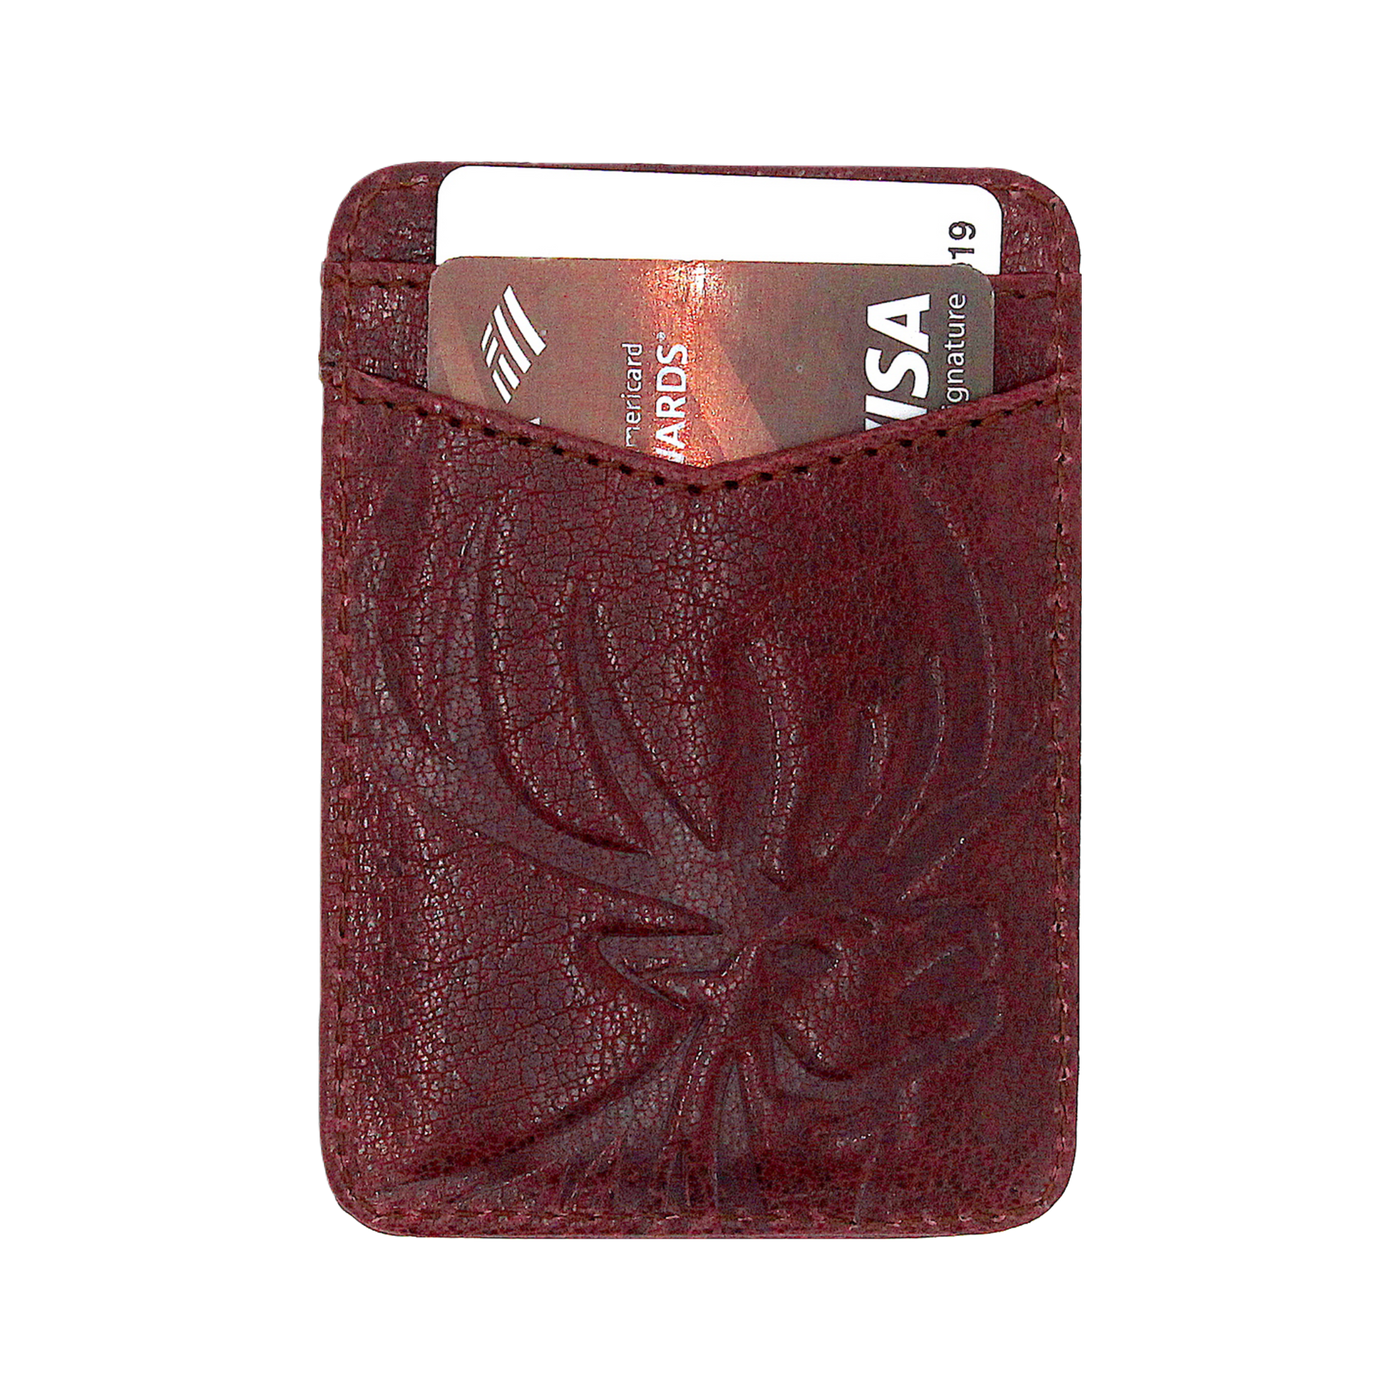 Providing a minimalist style, the Pursuit Front Pocket Elk Money Clip comes in premier full grain leather along with a beautiful bold hand-dyed color, topped with an elk debossed logo. A beautiful piece to have for the basics! Don't miss out! 2 Card Slots Strong Magnetic Closure Ultra Slim Minimalist & Modern Design Magnetic Clip Holds 10+ Bills Dimensions: 4"L x 2.8"H RFID Protection Color: Crimson